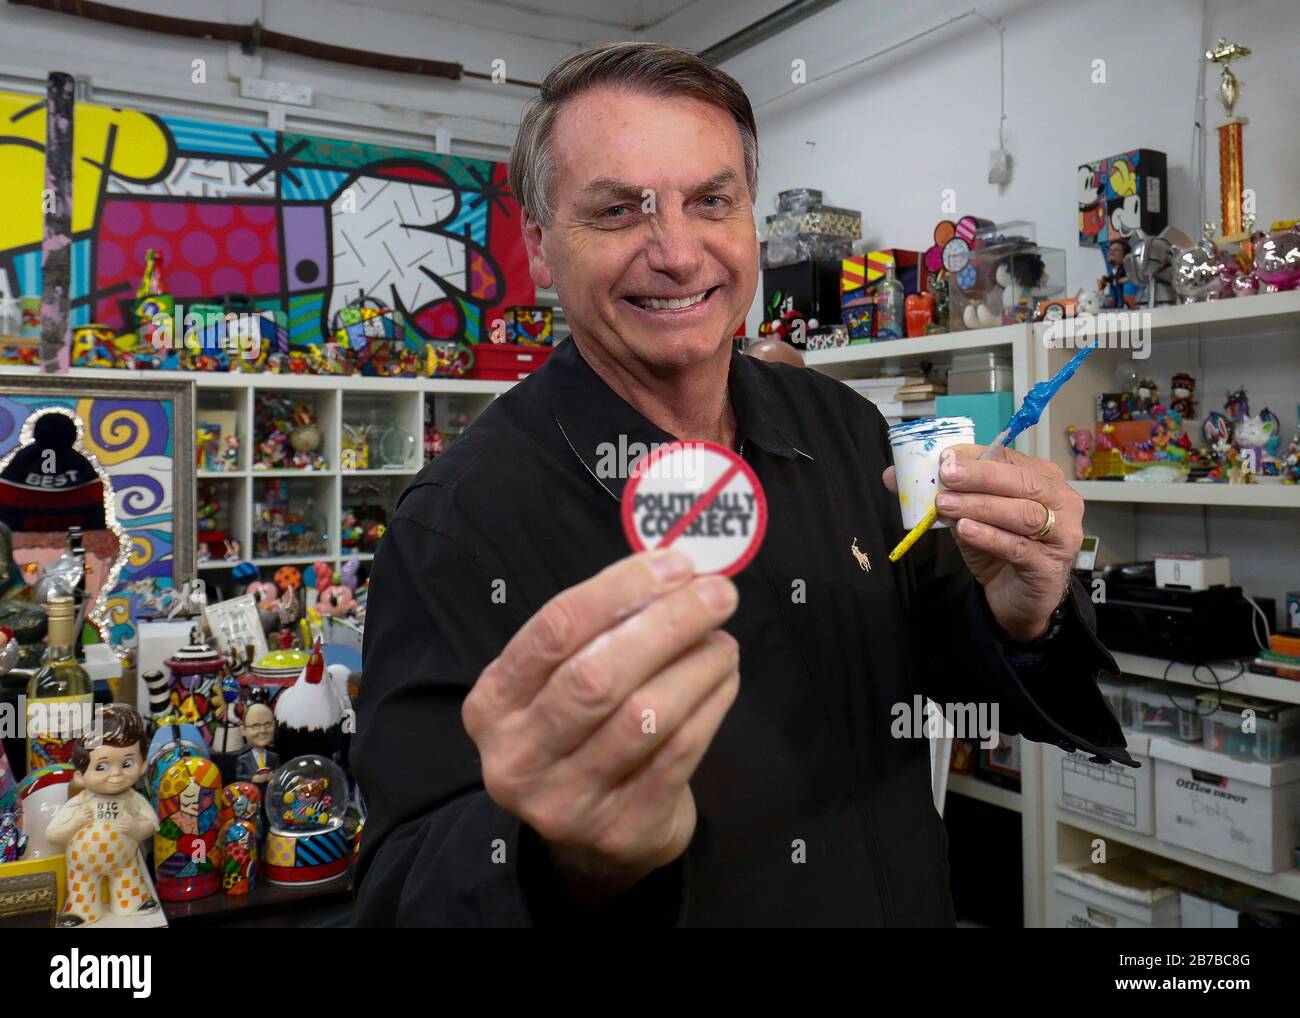 Brazilian President Jair Bolsonaro smiles as he holds up a humorous button during a visit to the art studio of Romero Britto March 8, 2020 in Miami, Florida. Stock Photo